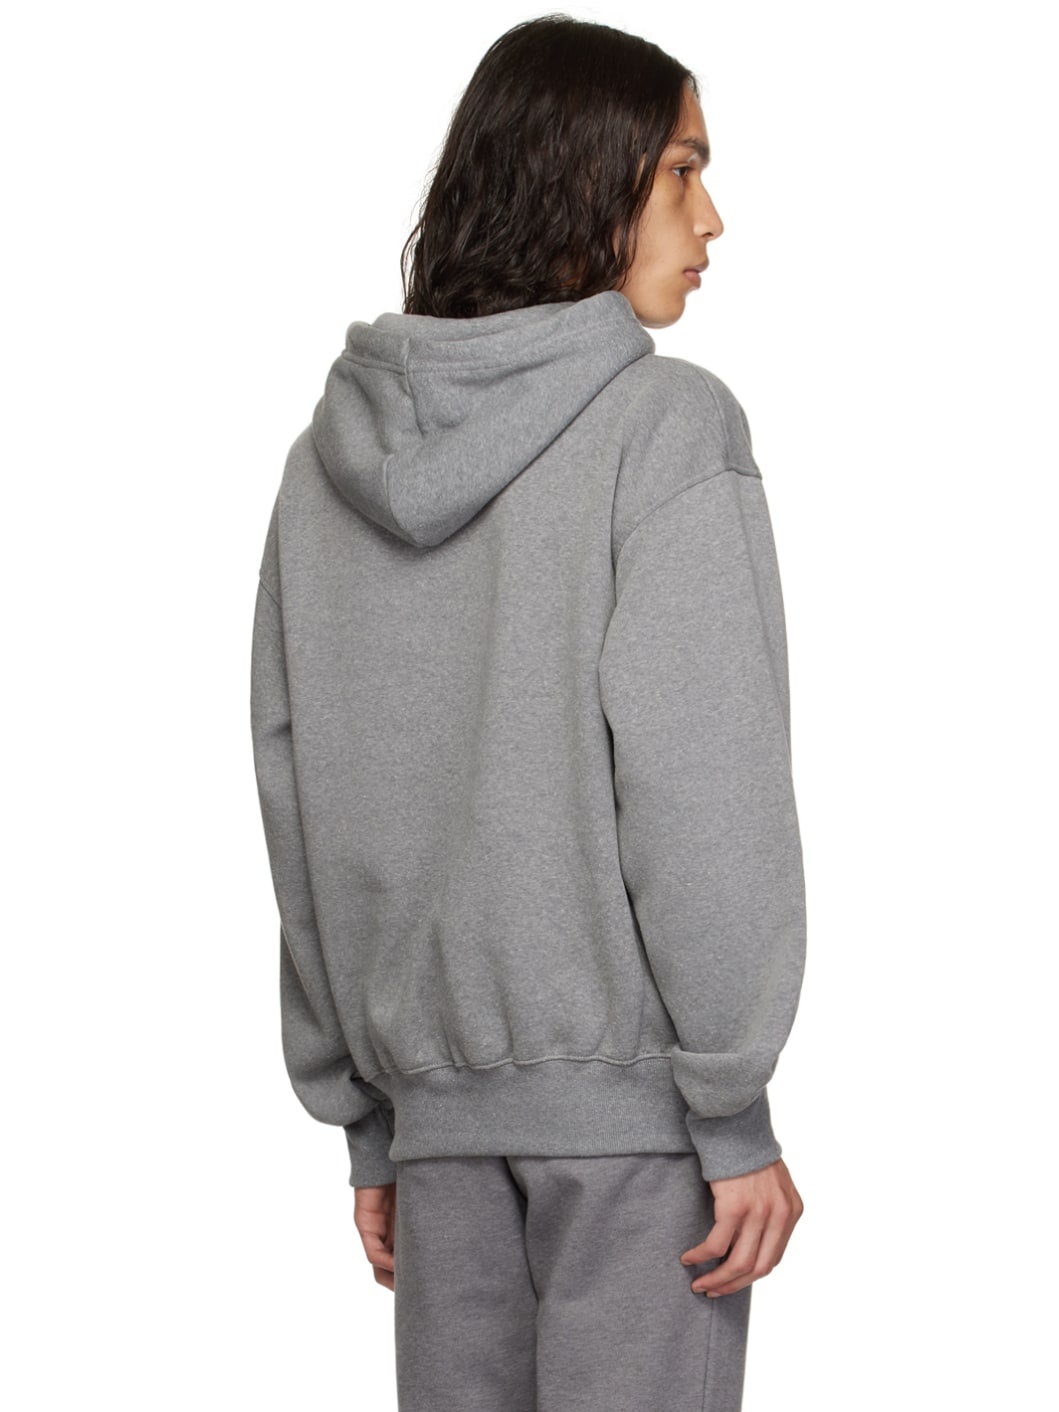 Gray Embroidered Hoodie - 3